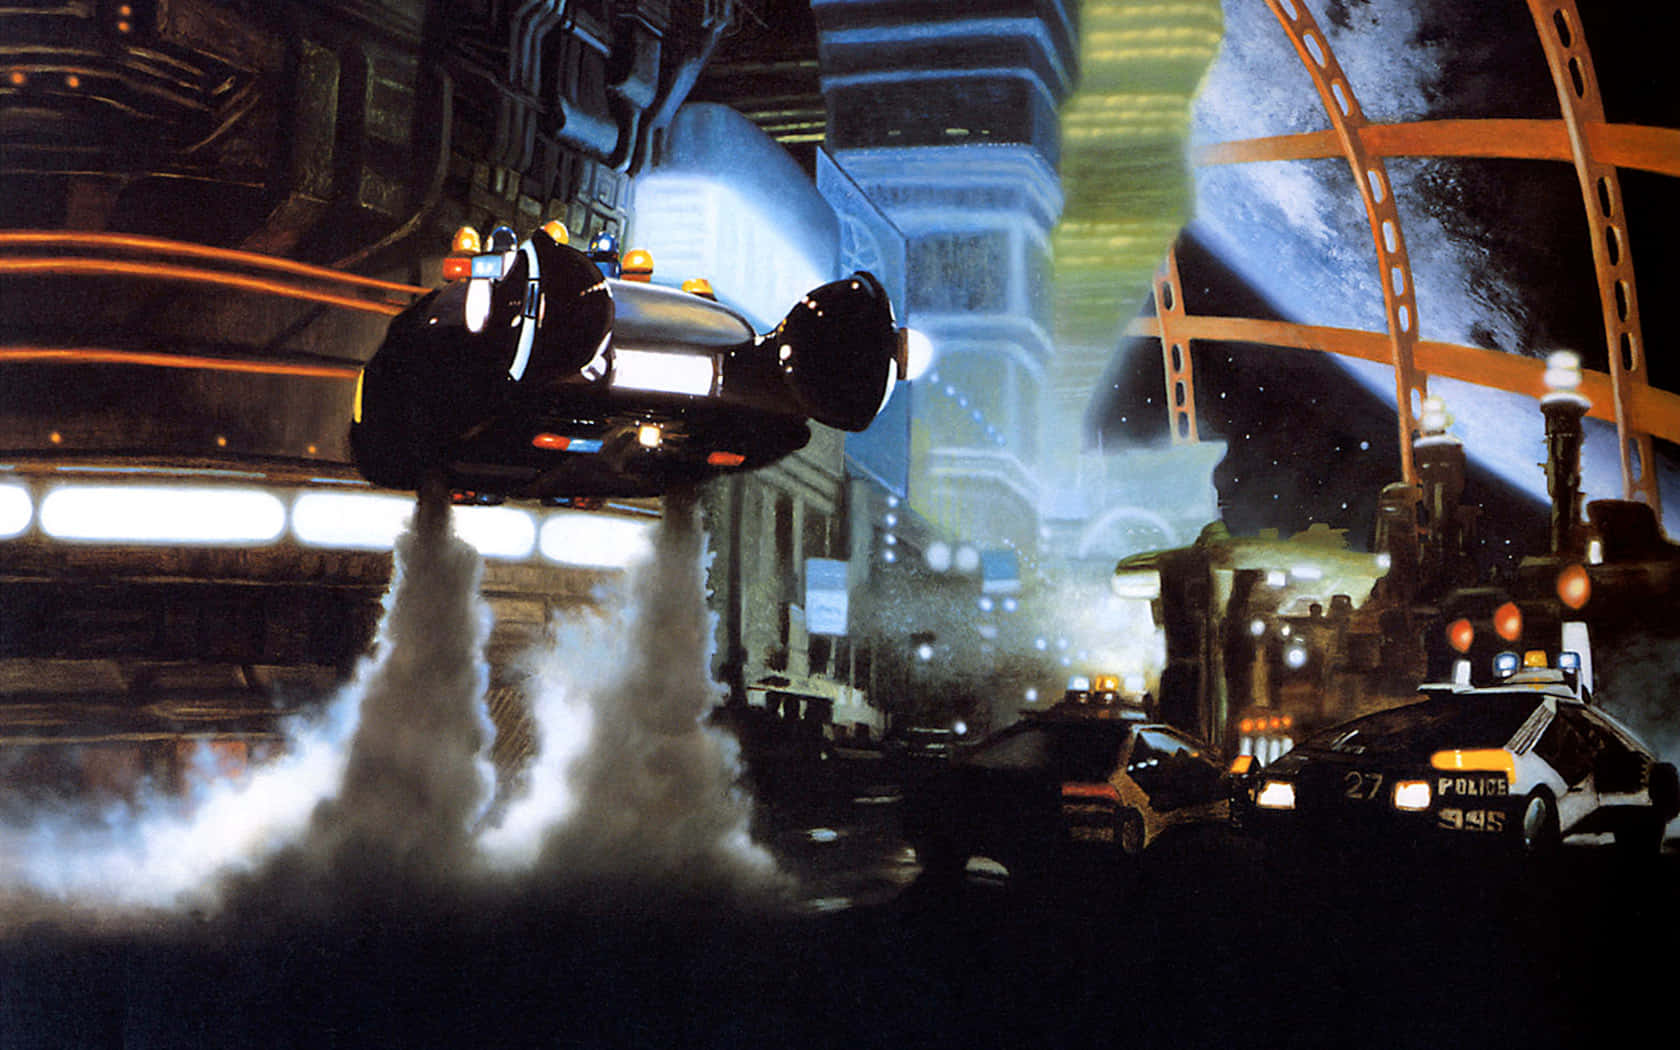 Step into the Future with Blade Runner